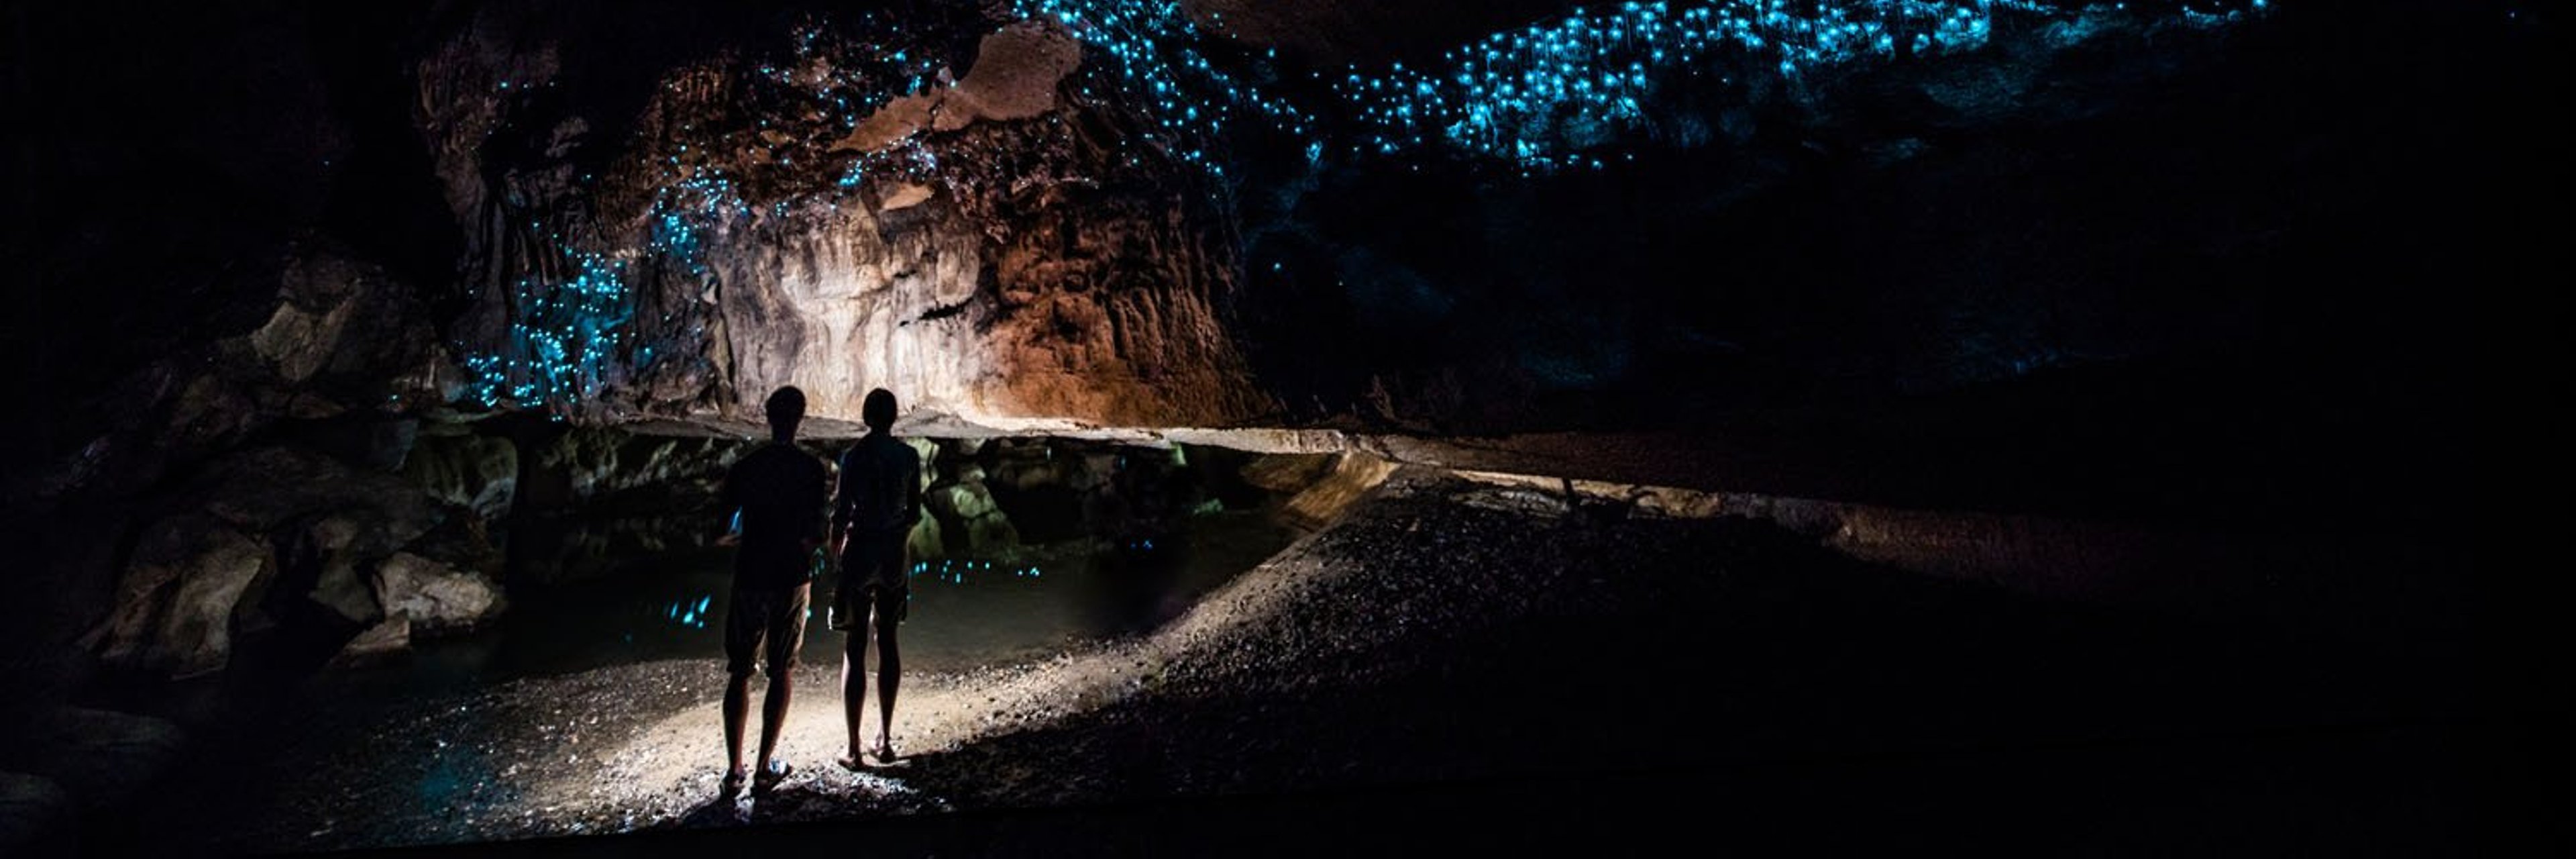 Glowworm Cathedral at the end of Waipu Cave in New Zealand.